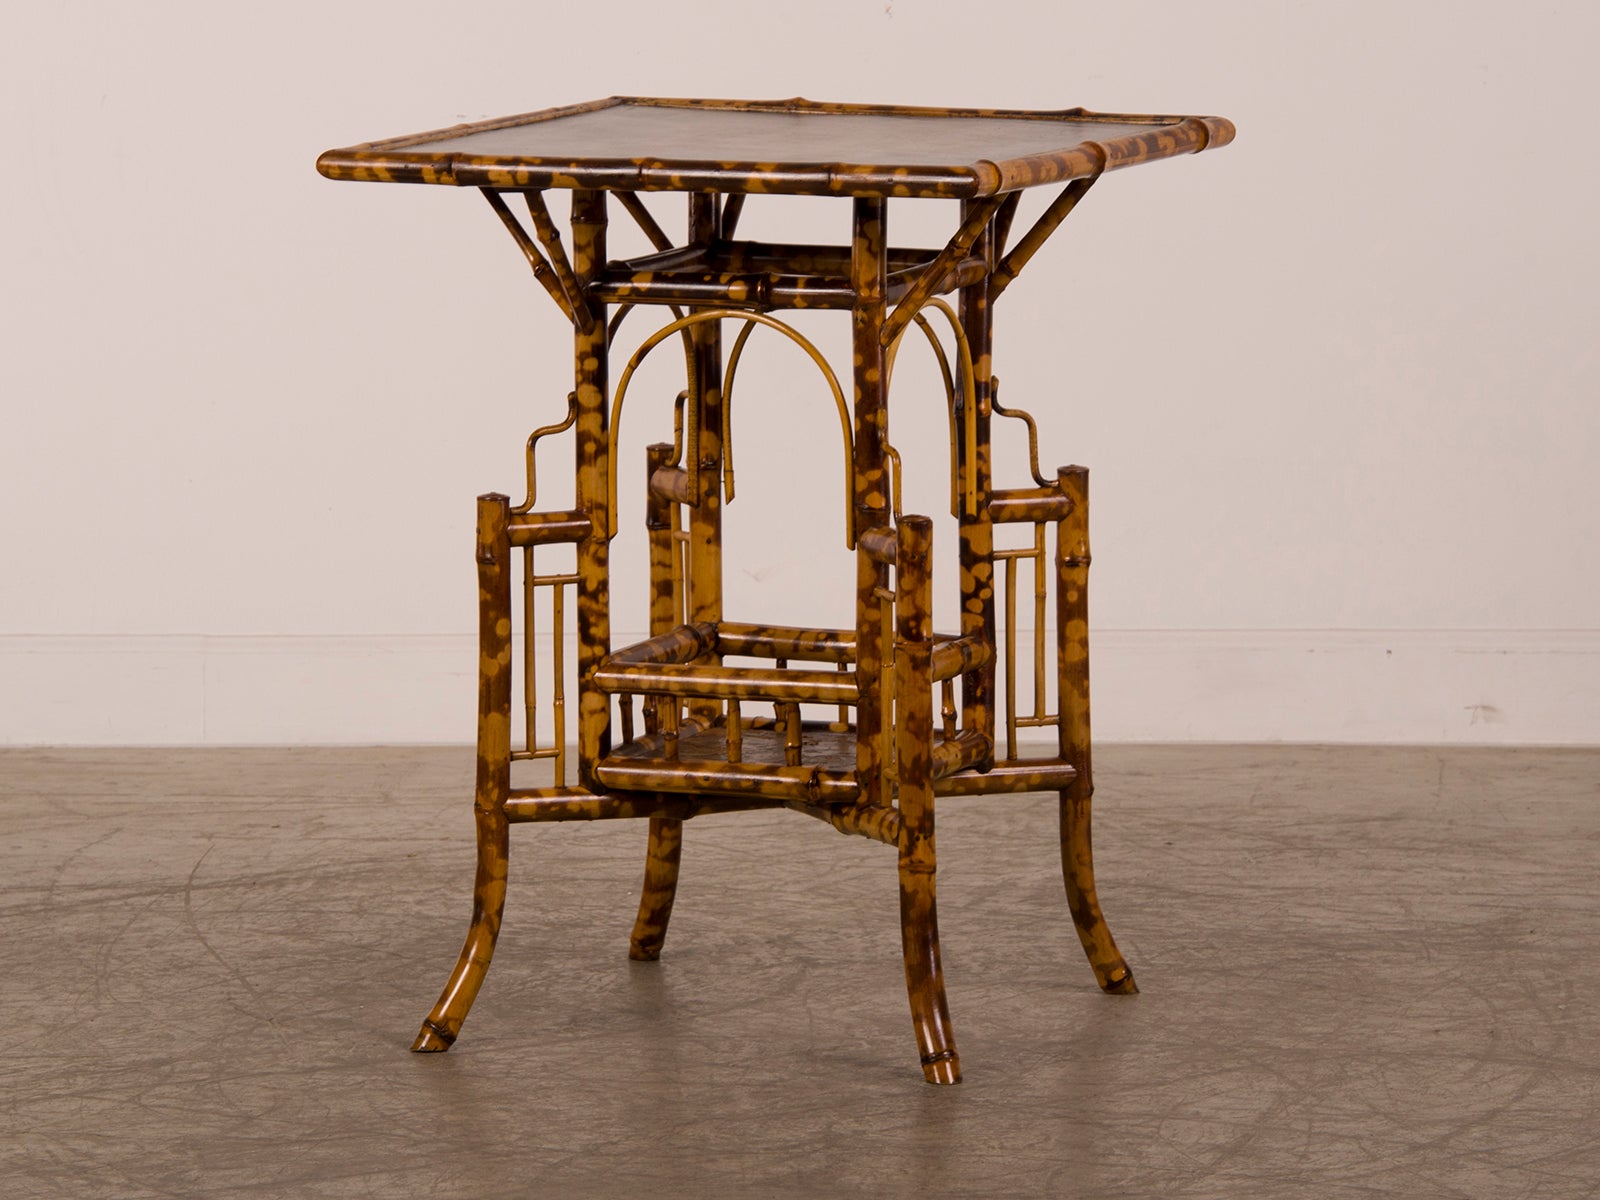 A Fantastic Scorched Bamboo Table From France C.1890